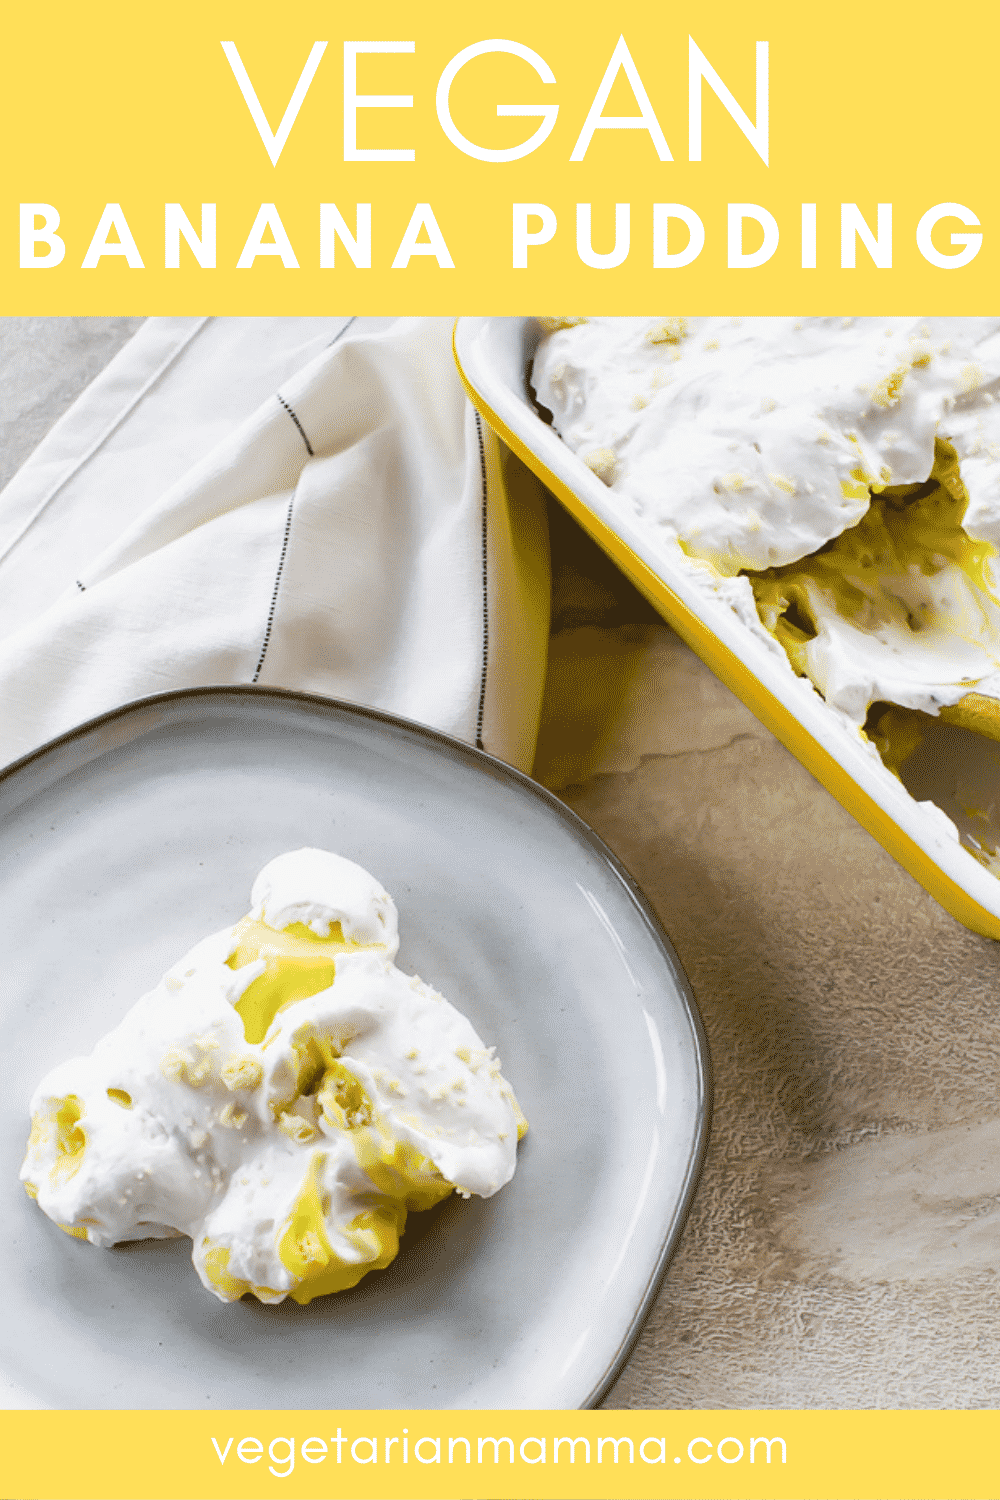 This vegan banana pudding layers sweet from scratch pudding, freshly sliced bananas, crumbled vanilla cookies and vegan whipped cream. Minimal ingredients come together quickly to create a comforting vegan dessert. #pudding #veganpudding #bananapudding #veganbananapudding #dairyfreepudding